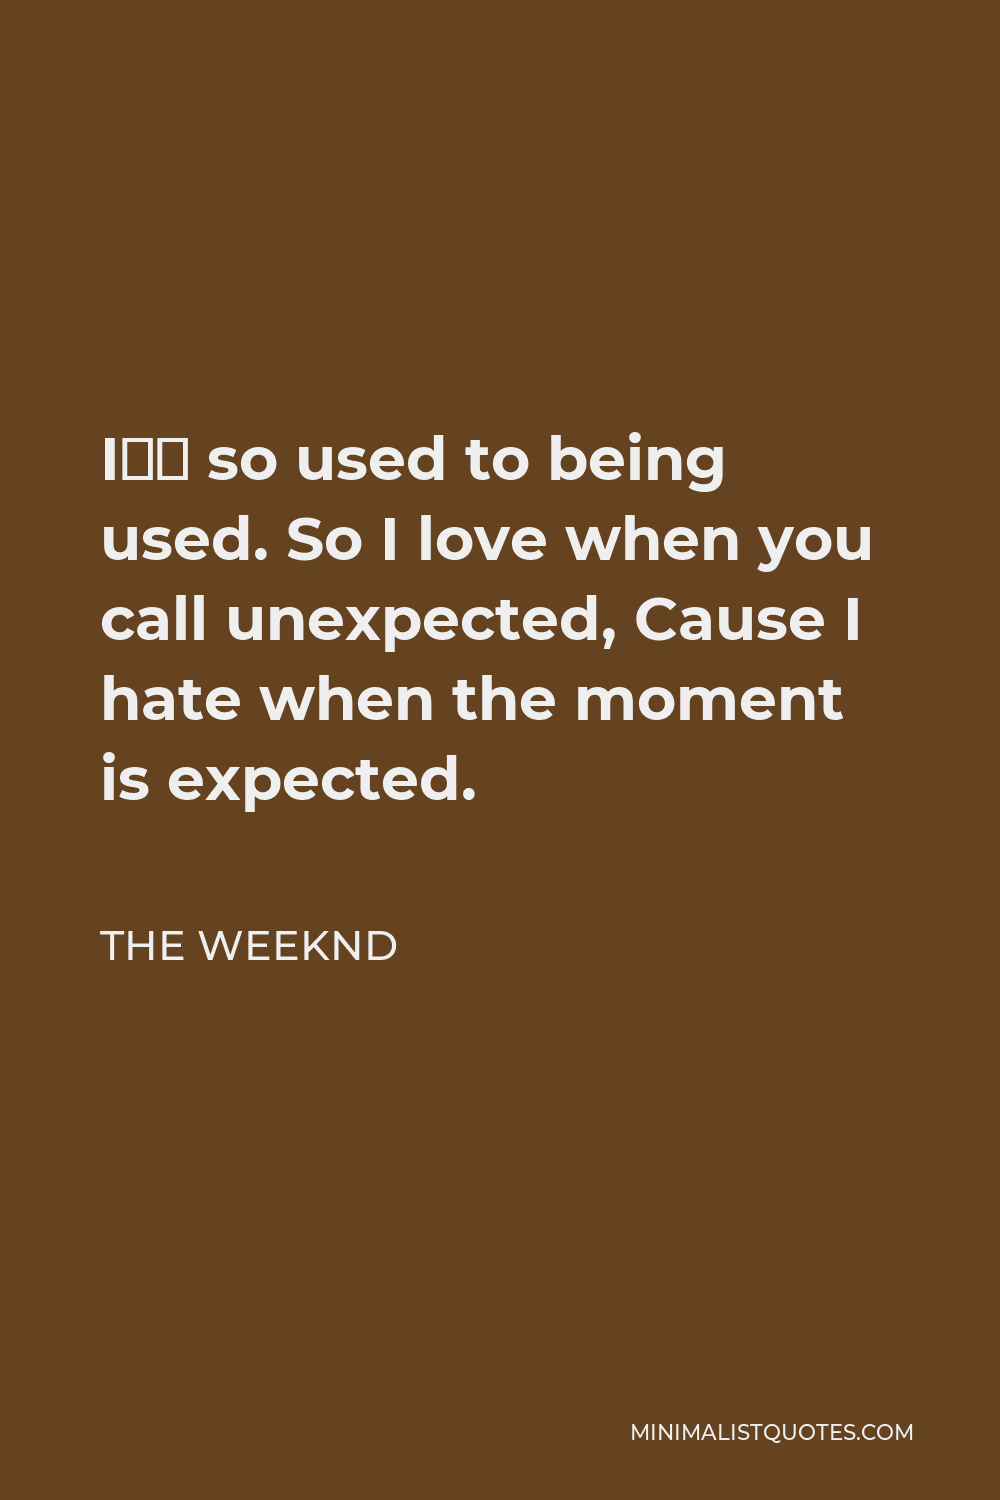 The Weeknd Quote - I’m so used to being used. So I love when you call unexpected, Cause I hate when the moment is expected.